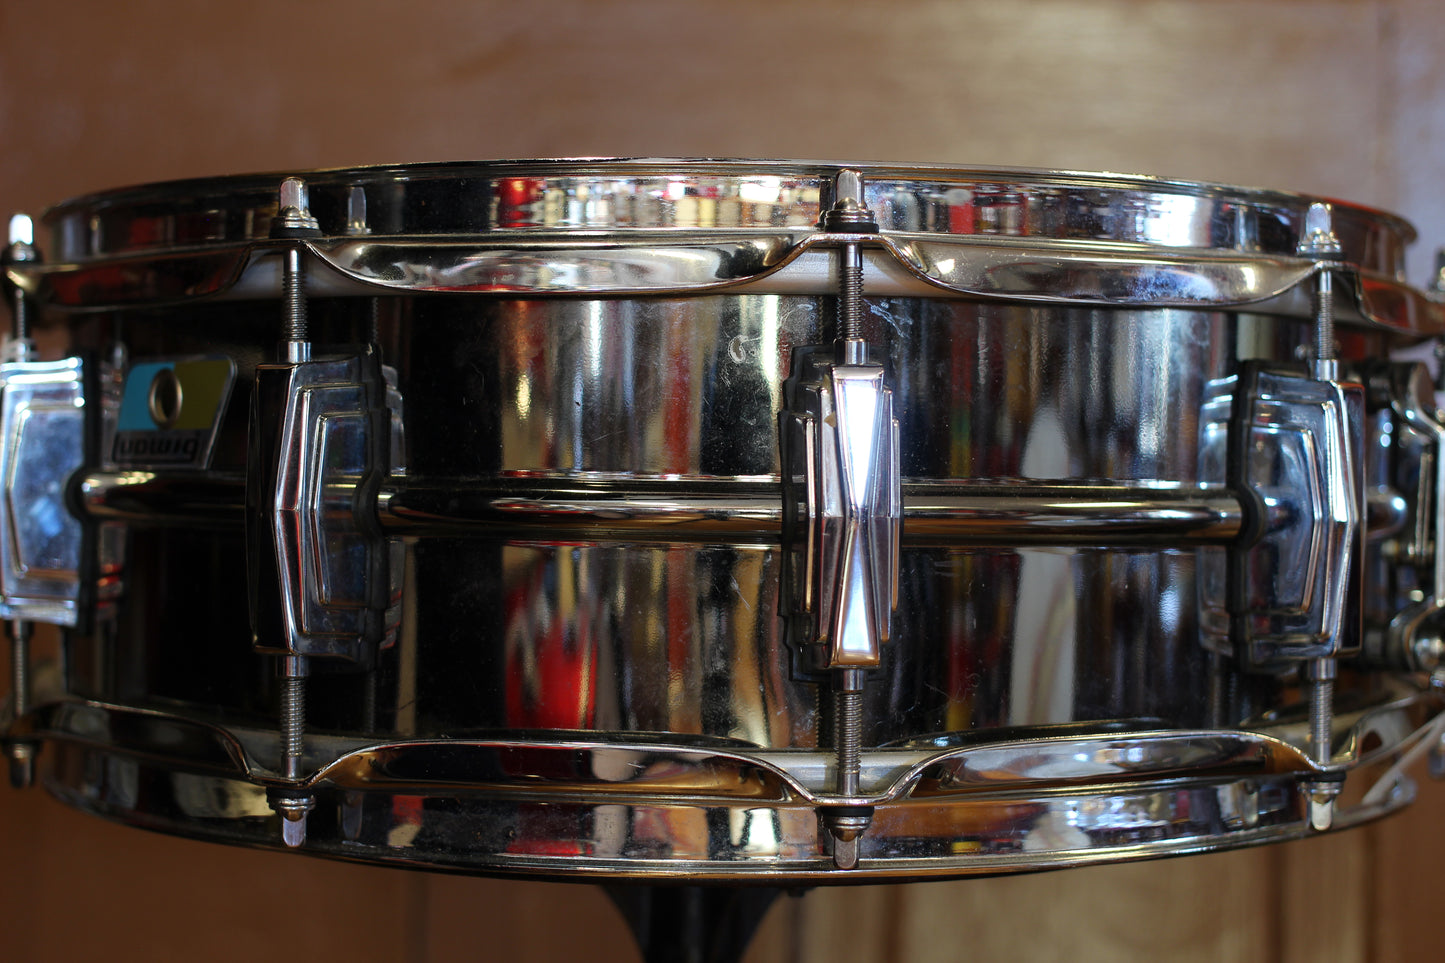 Used Ludwig 'B-Stock' Black Beauty Snare Drum 5"x14"